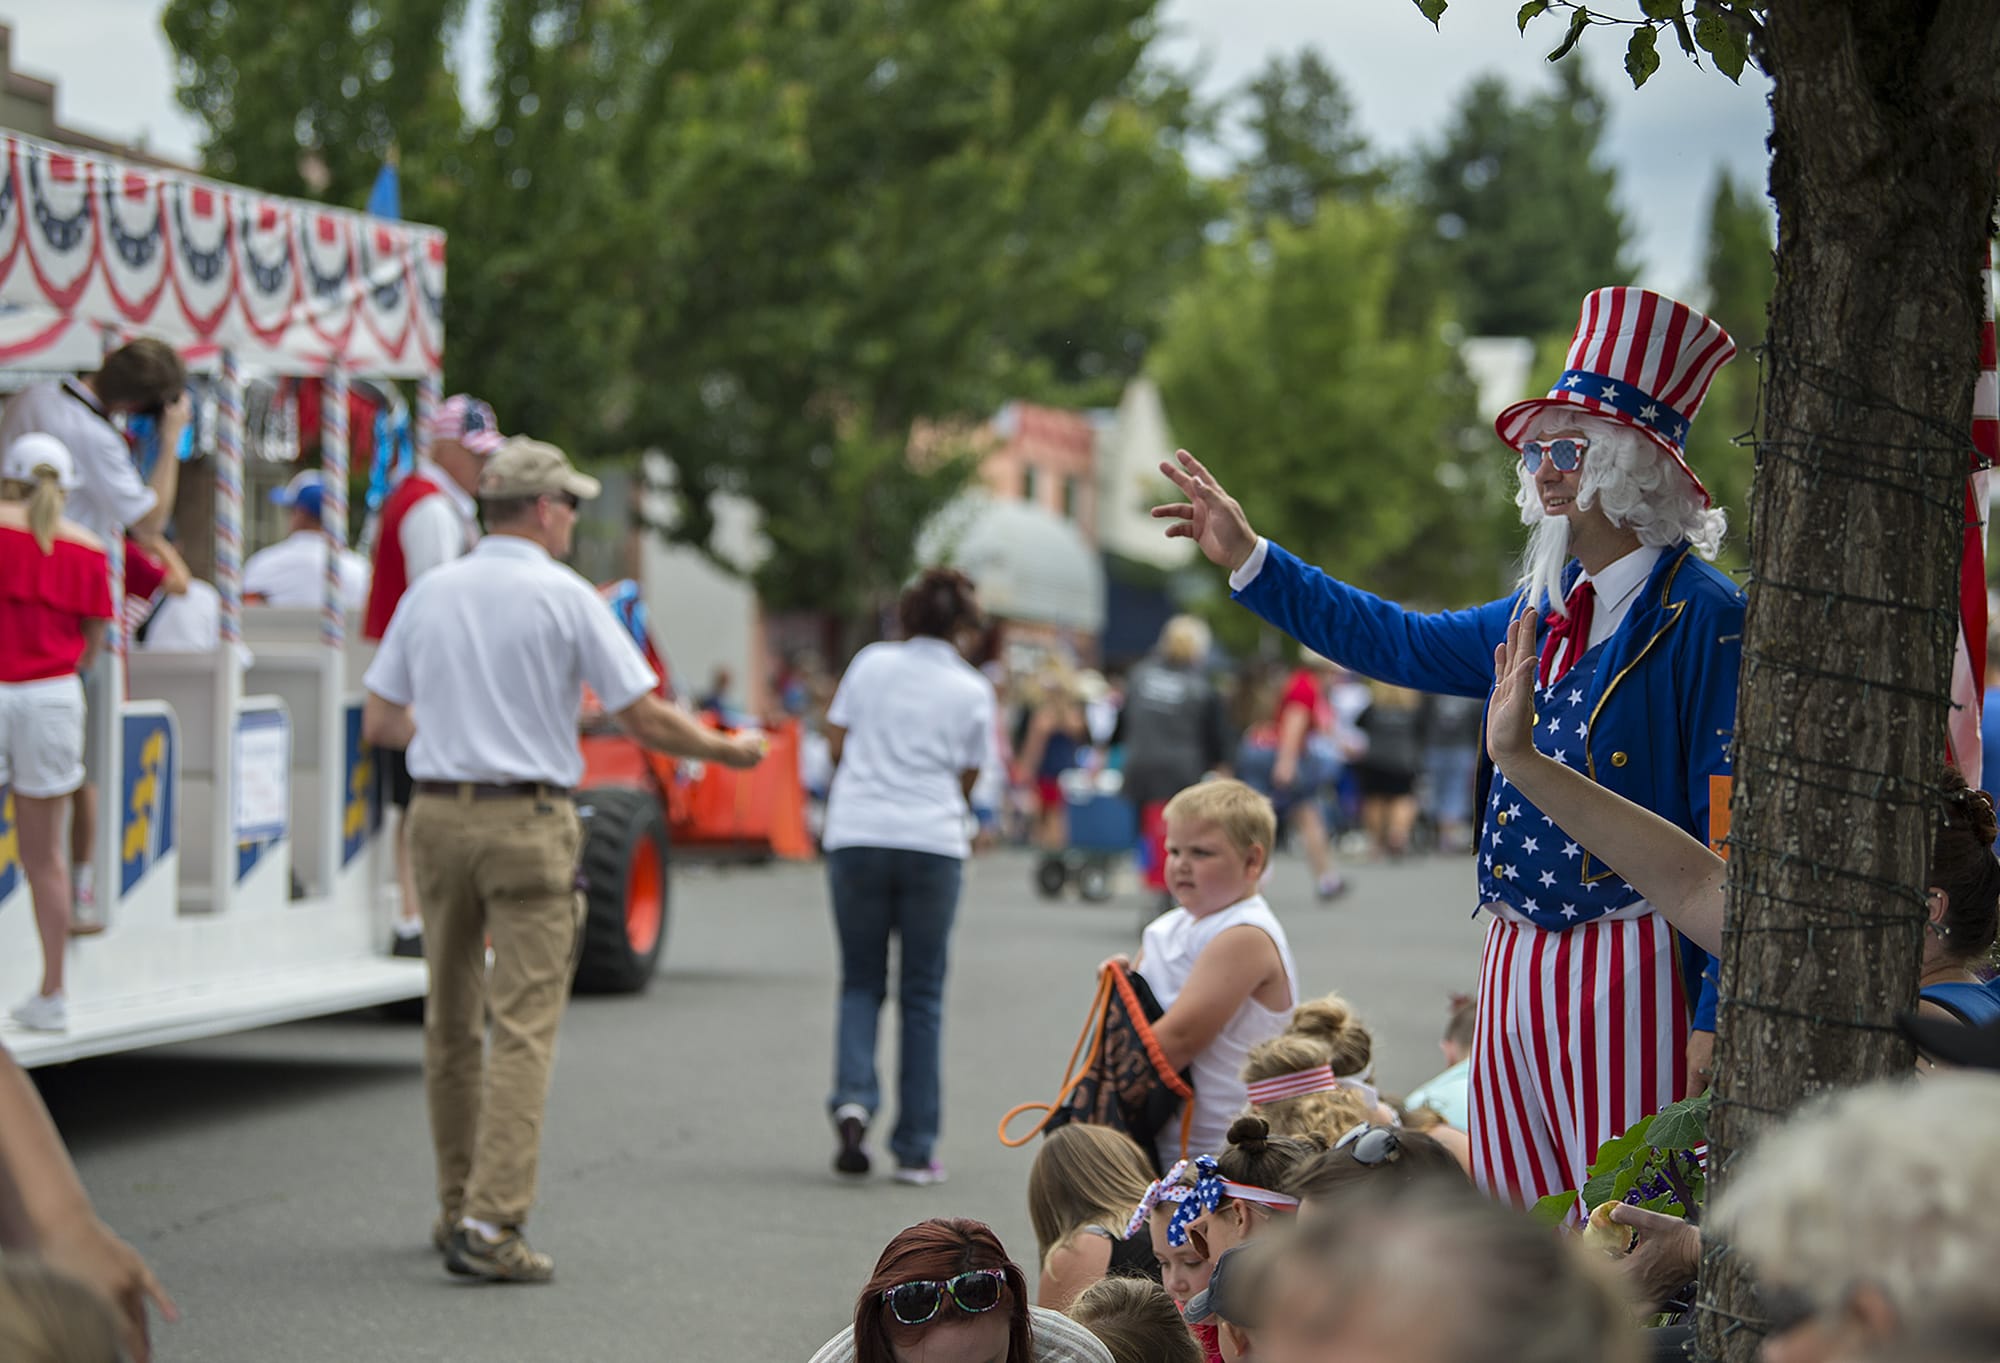 Ed Martin of Ridgefield, right, gets into the spirit of the Fourth of July dressed as Uncle Sam as he enjoys the annual parade from his spot along Pioneer Street on Wednesday morning. Martin said the holiday has special meaning for him because he became an American citizen in 2014. He said he was excited to join the celebration this year. "Loved it last year, couldn't miss it this year," he said.